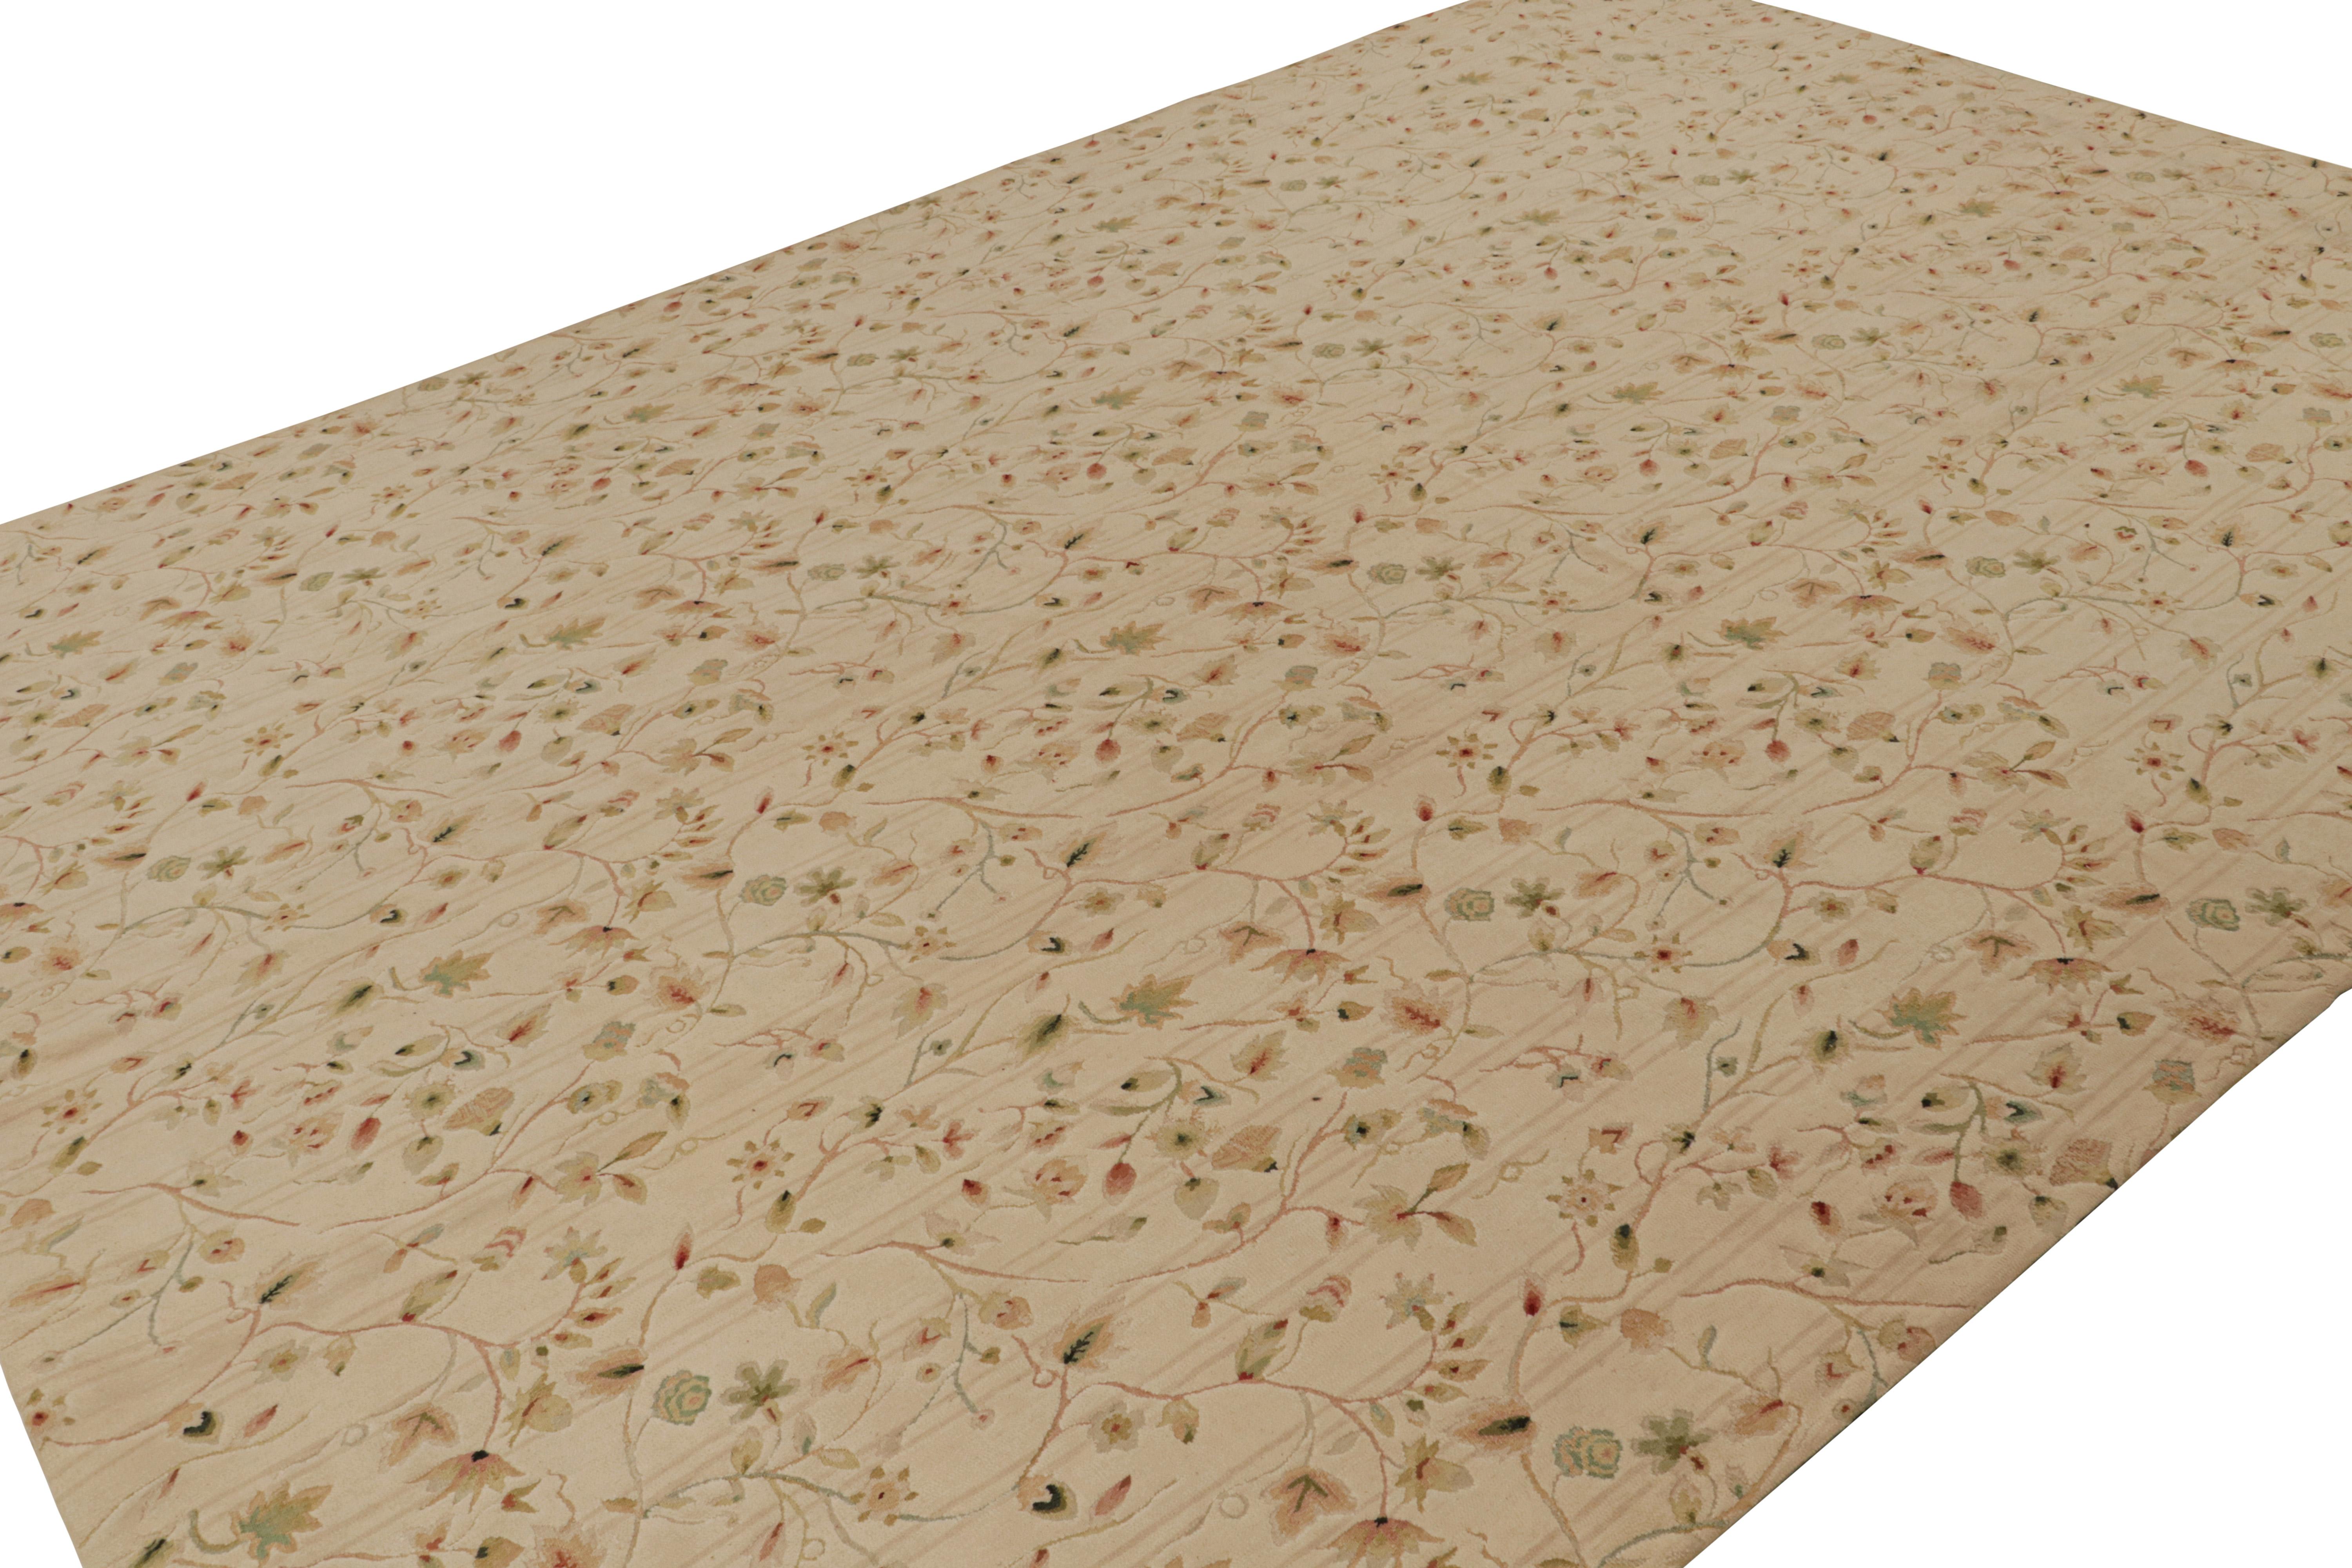 Hand-knotted in wool, this 10x14 European rug in beige is the first iteration of this design to be in high-and-low texture. Featuring green and red floral patterns with cream undertones, this rug has been inspired by Tudor designs. 

On the Design: